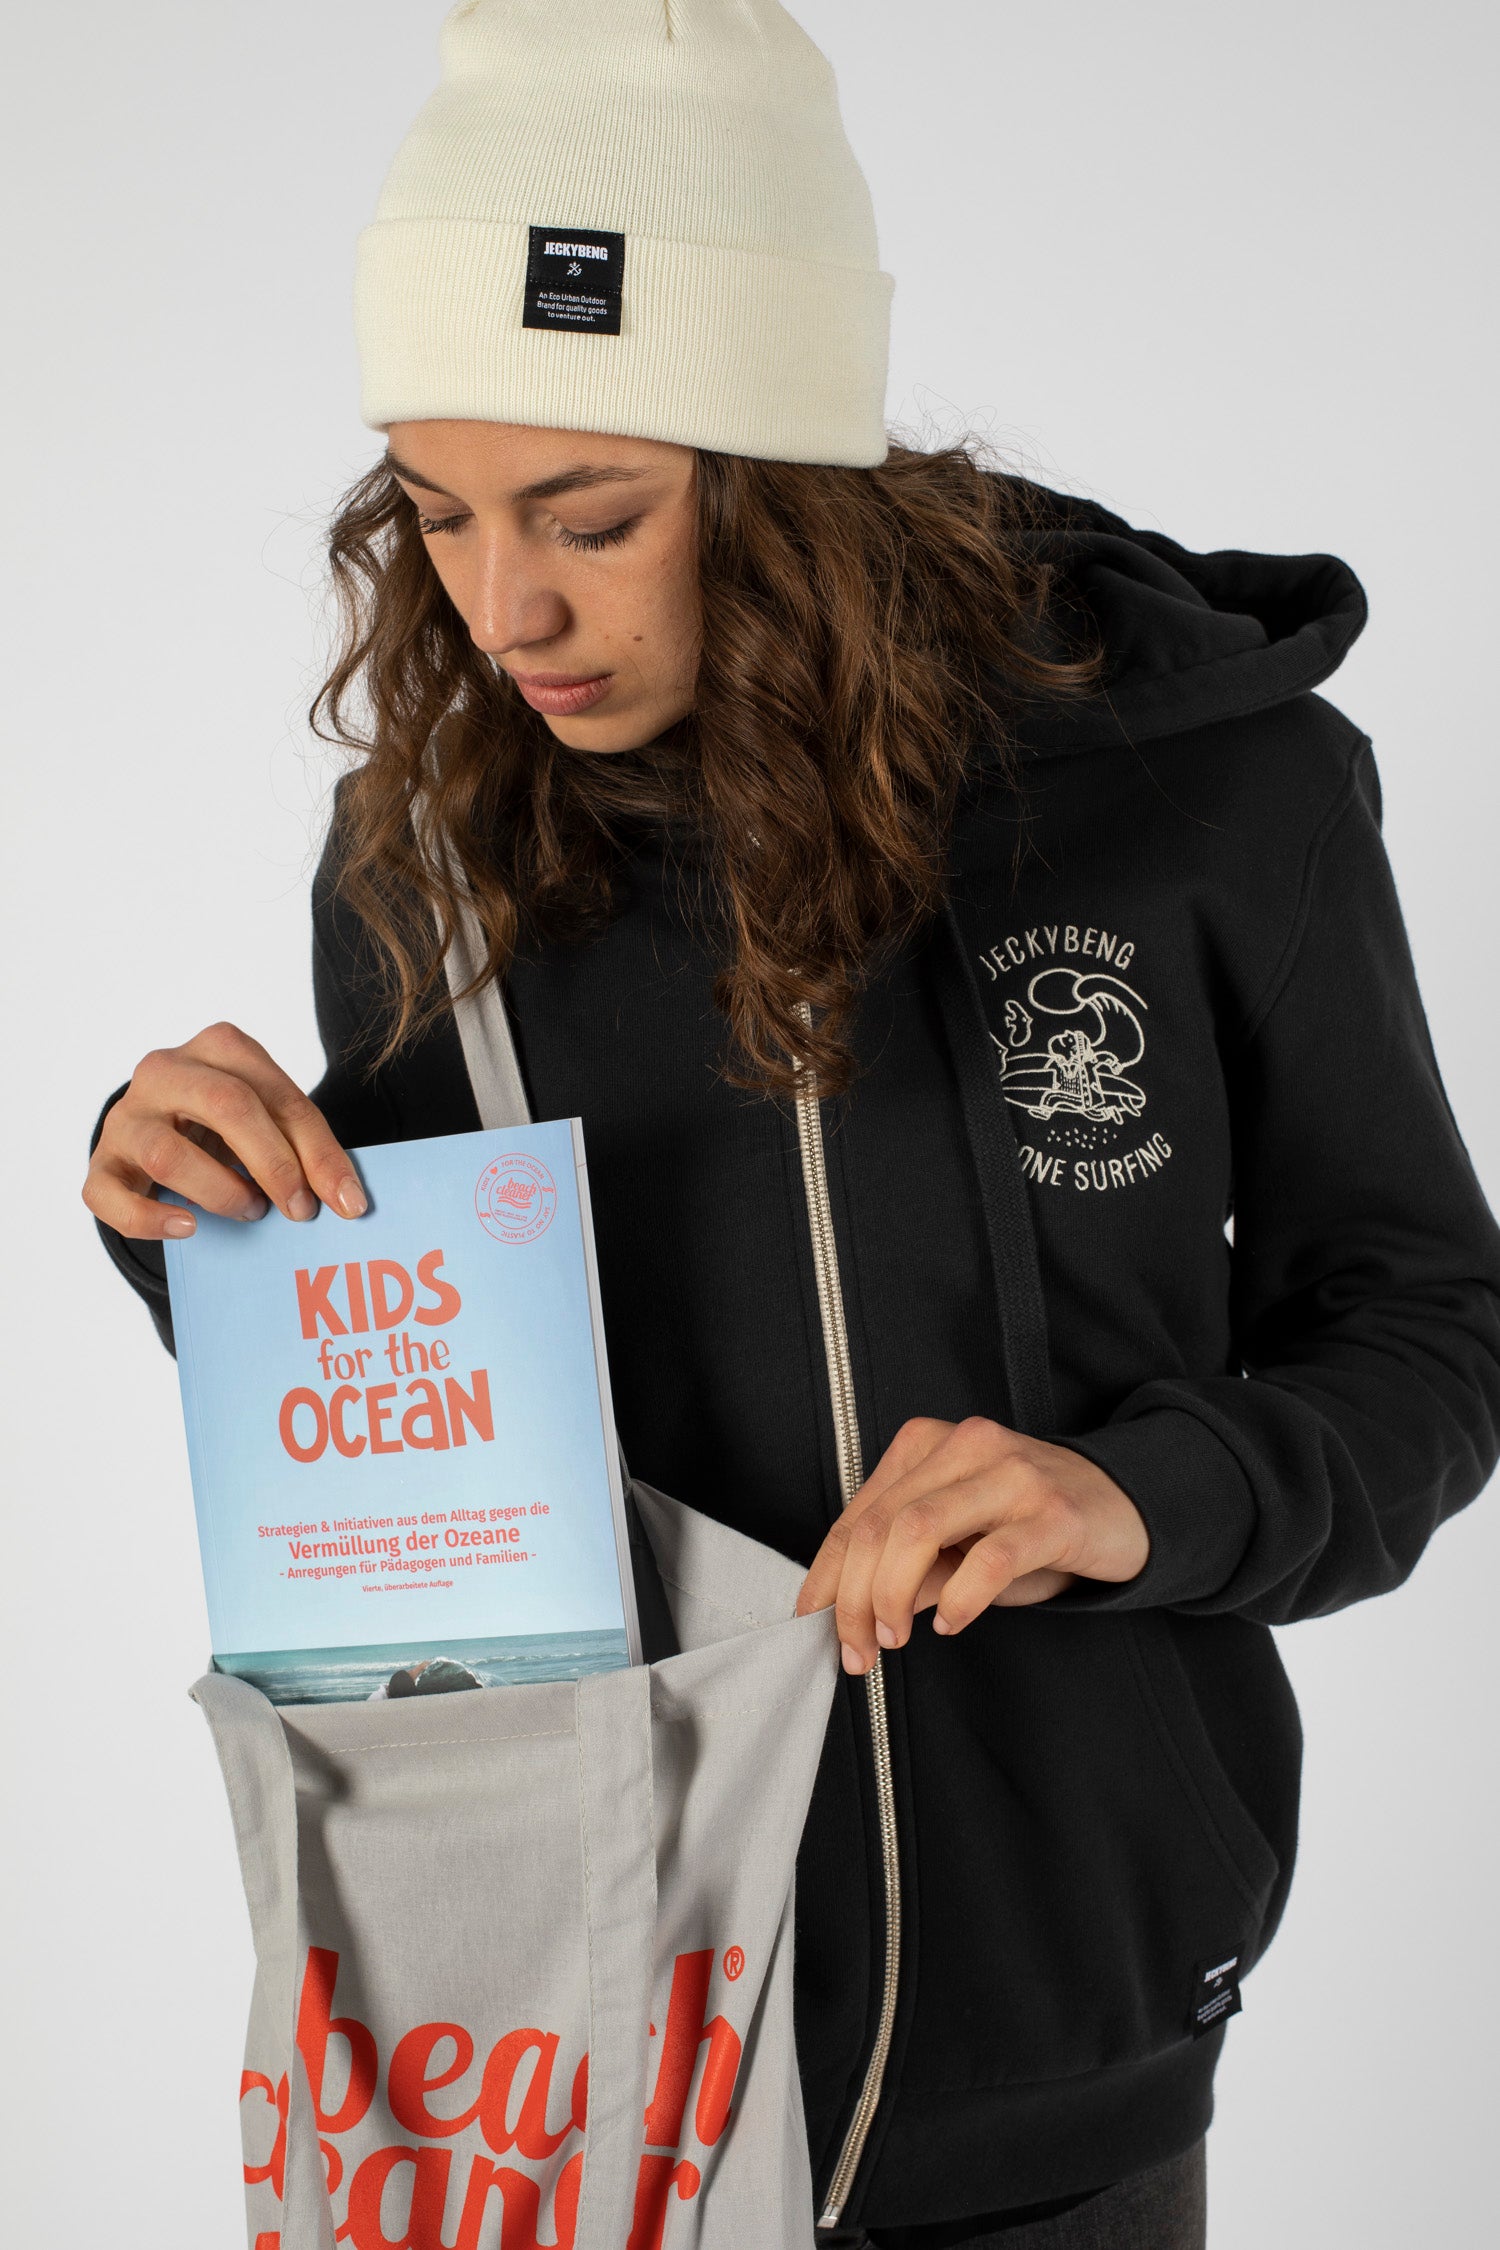 The BOOK "Kids for the Ocean"